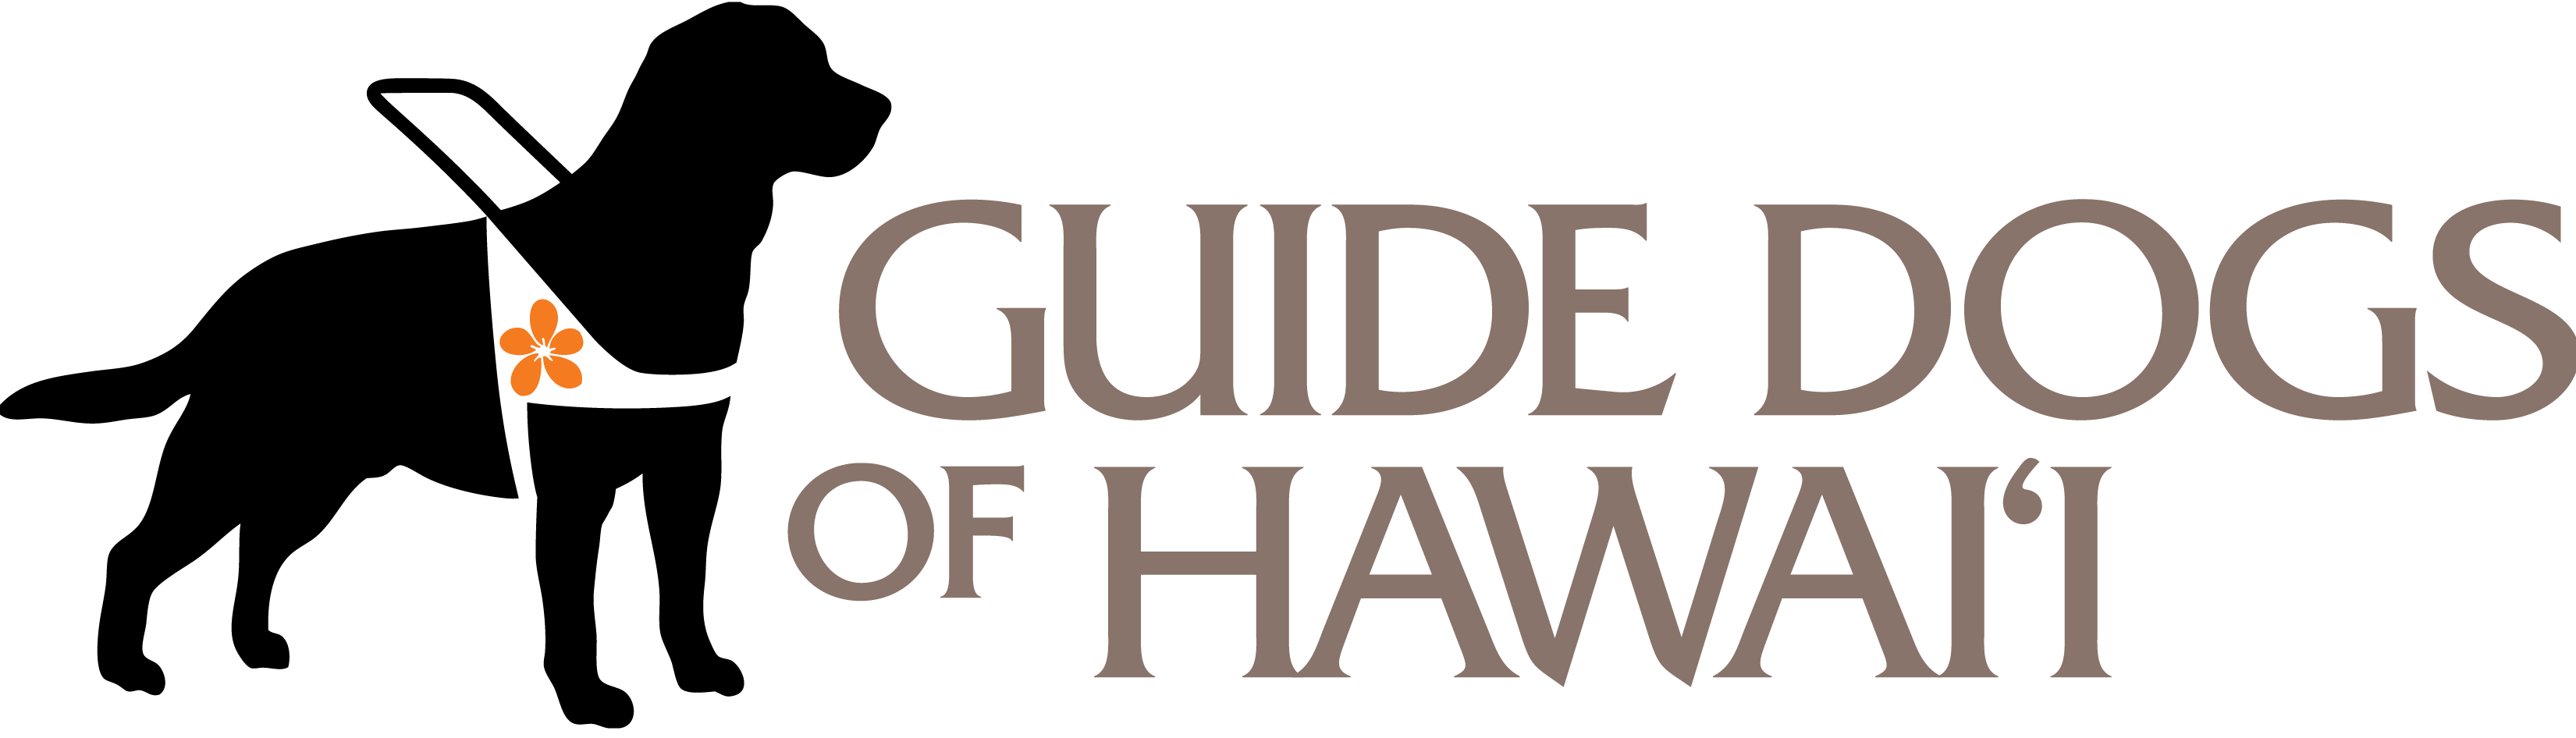 the logo for the guide dogs of hawaii.